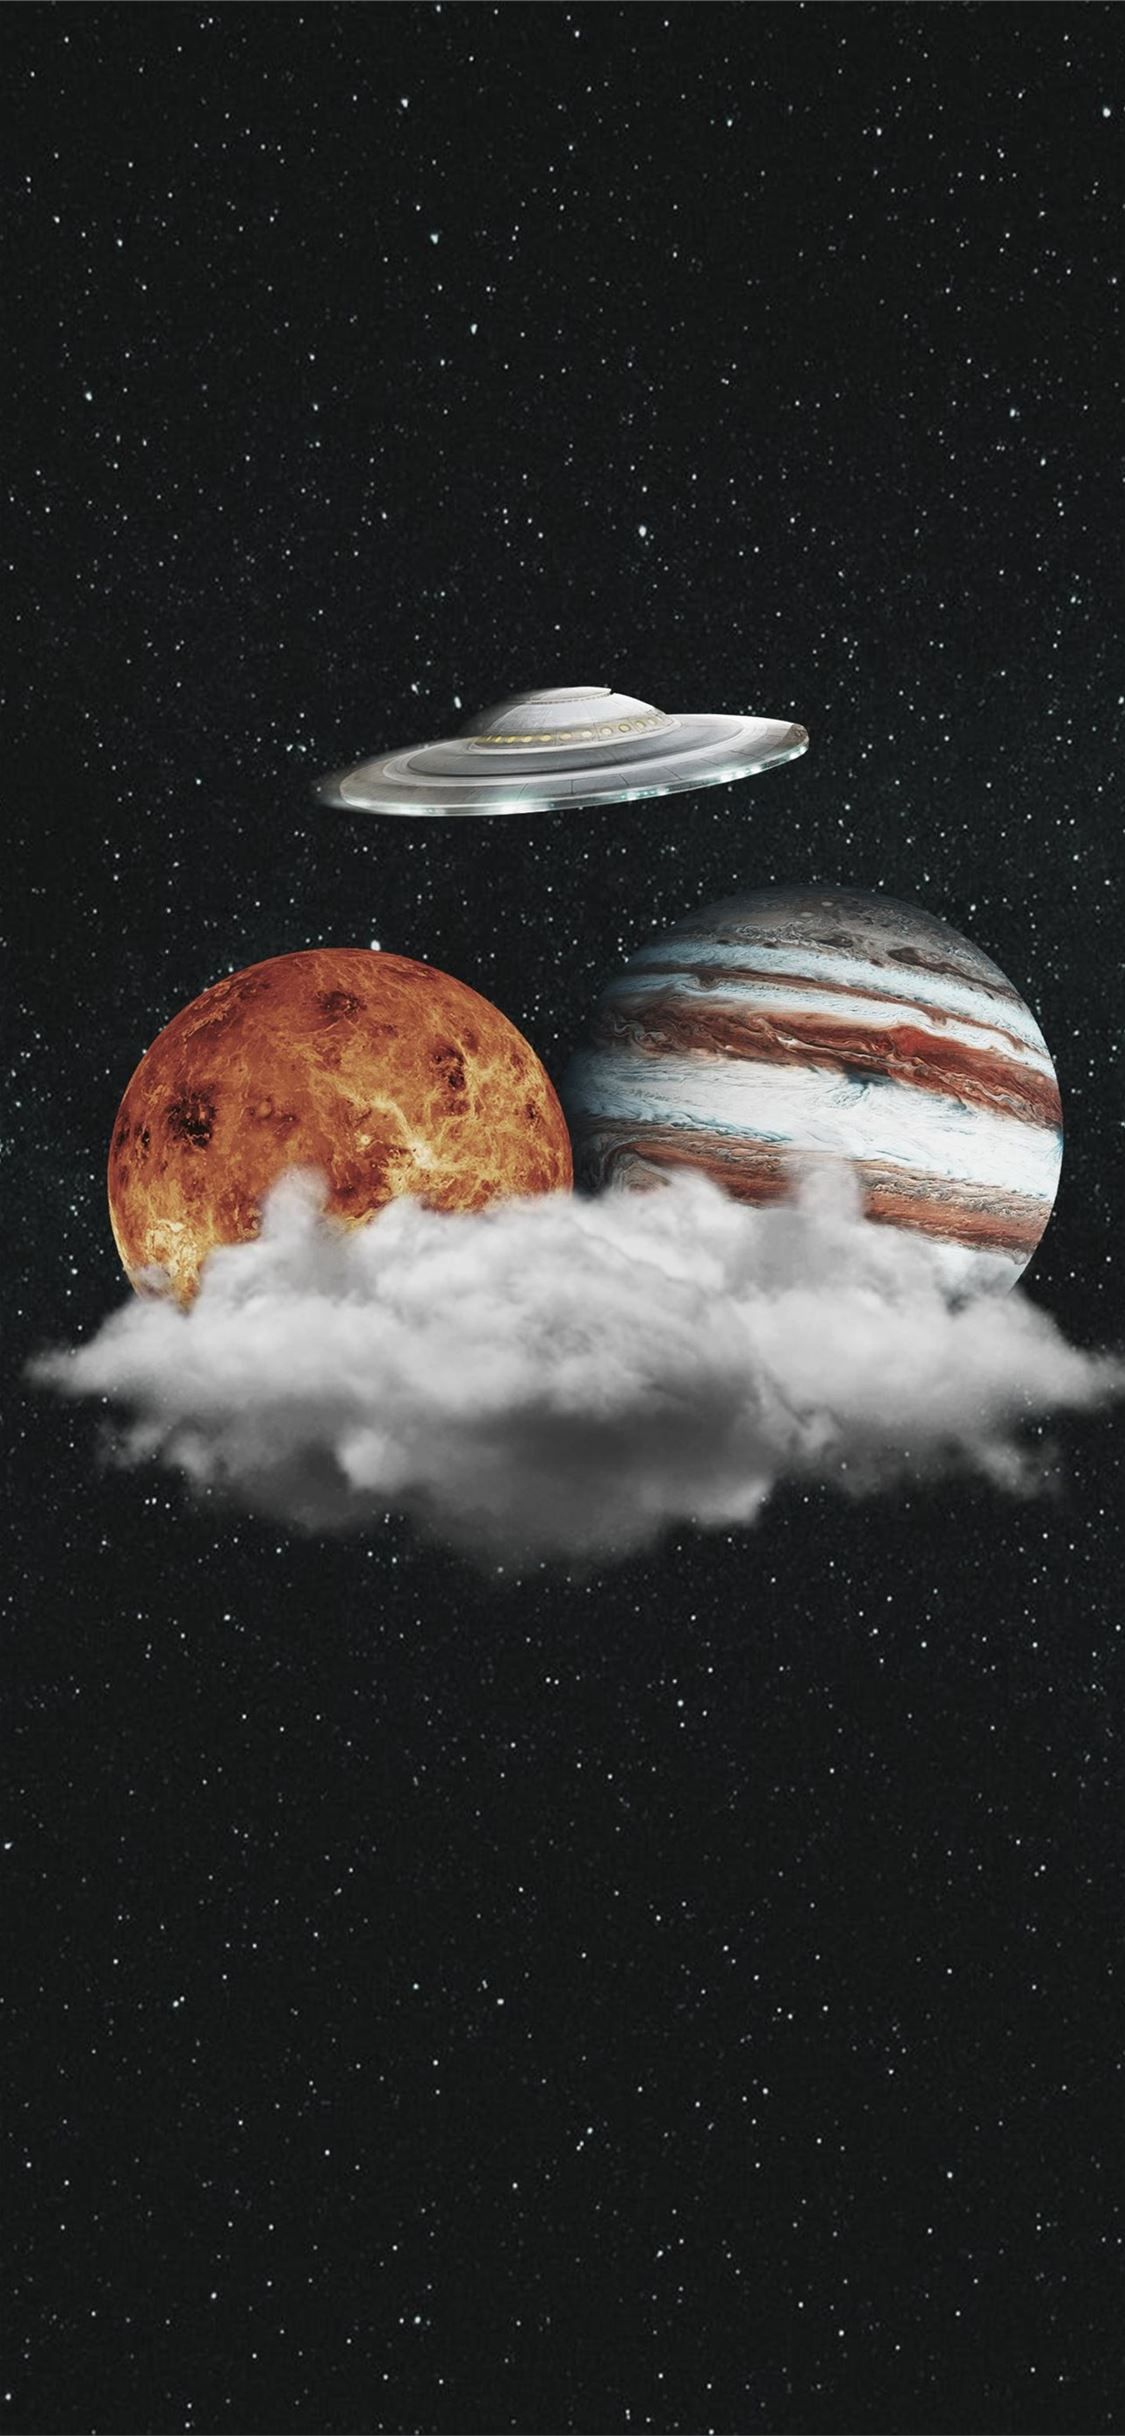 Planets in the clouds - Venus